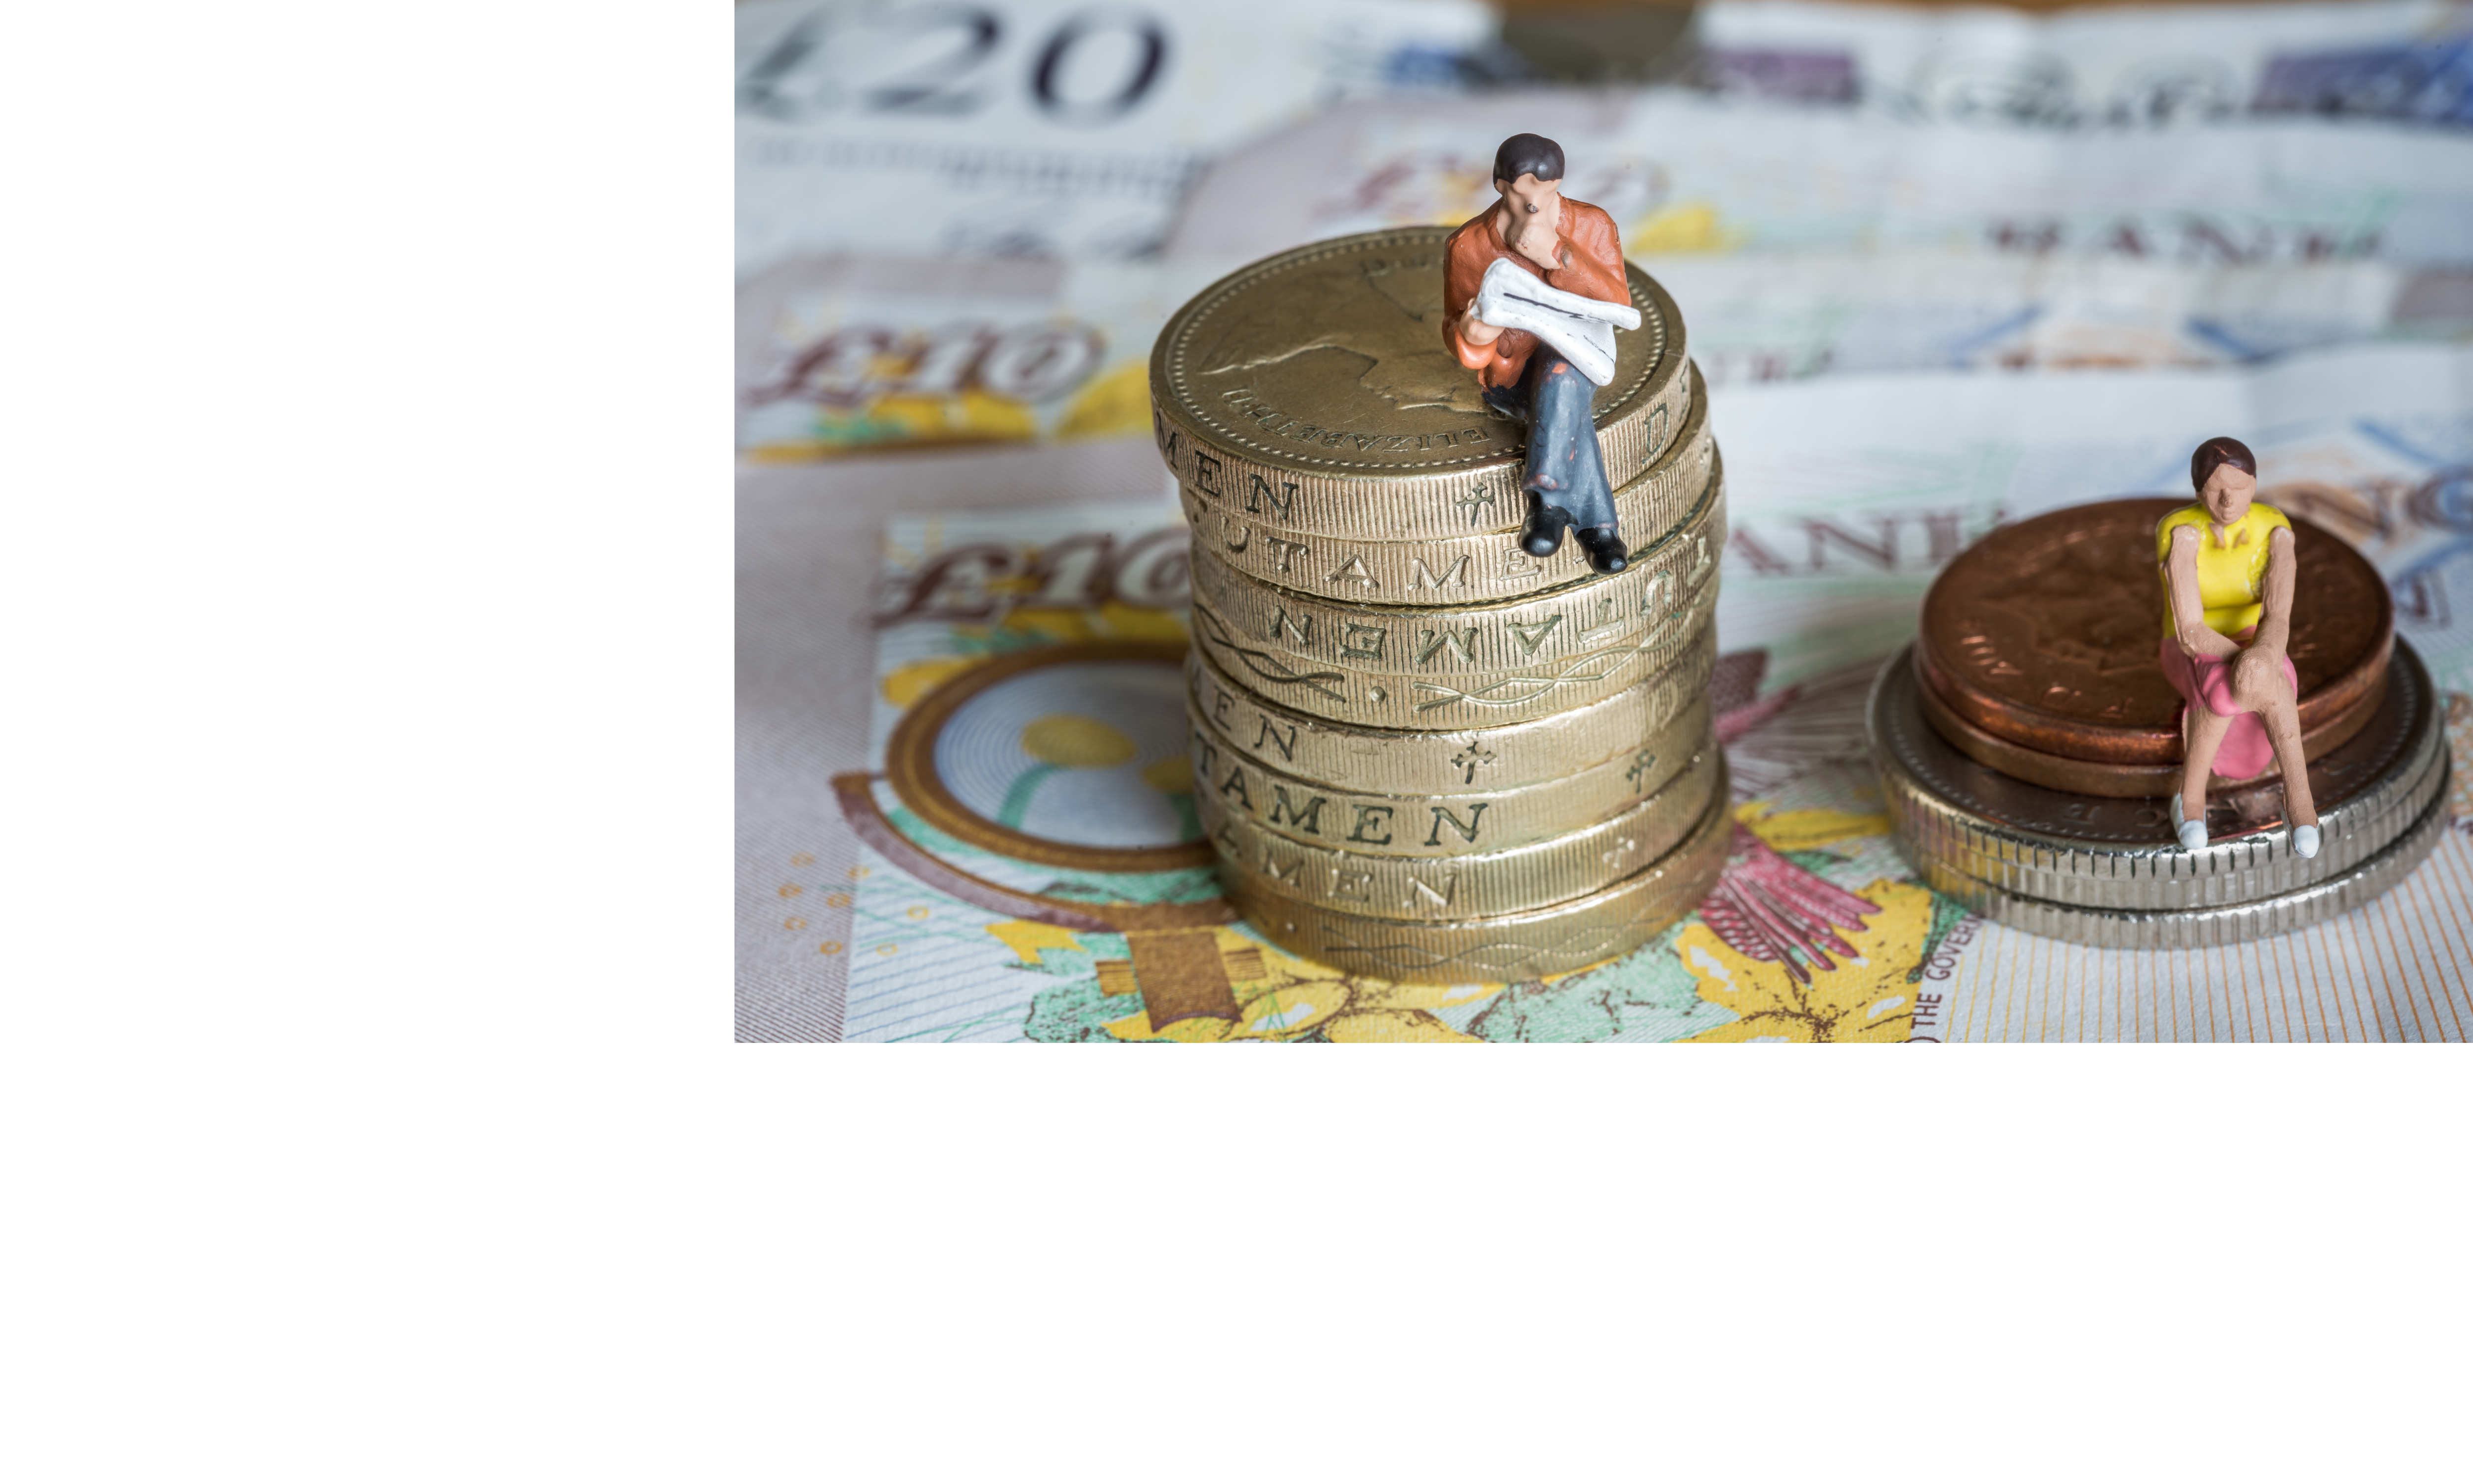 Publishing gender pay figures: will it make any difference?